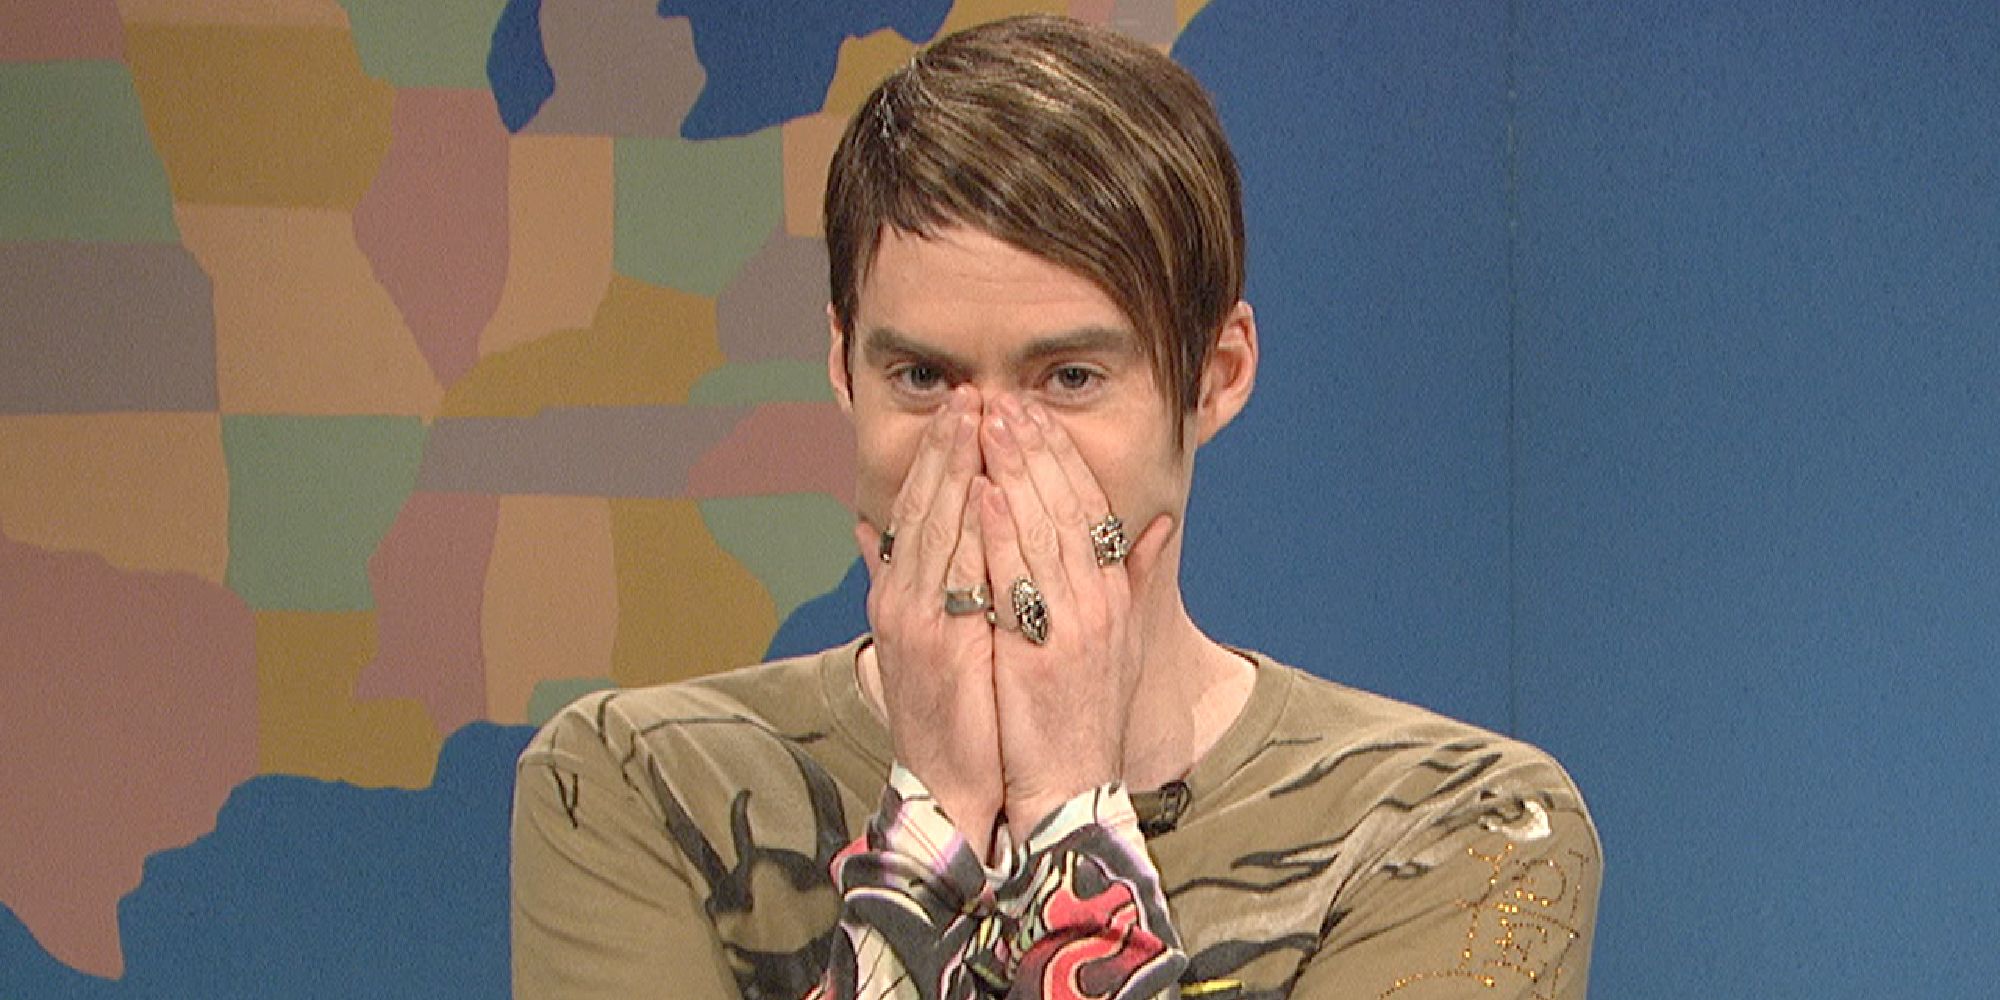 Bill Hader as Stefon on Weekend Update covering his face to laugh